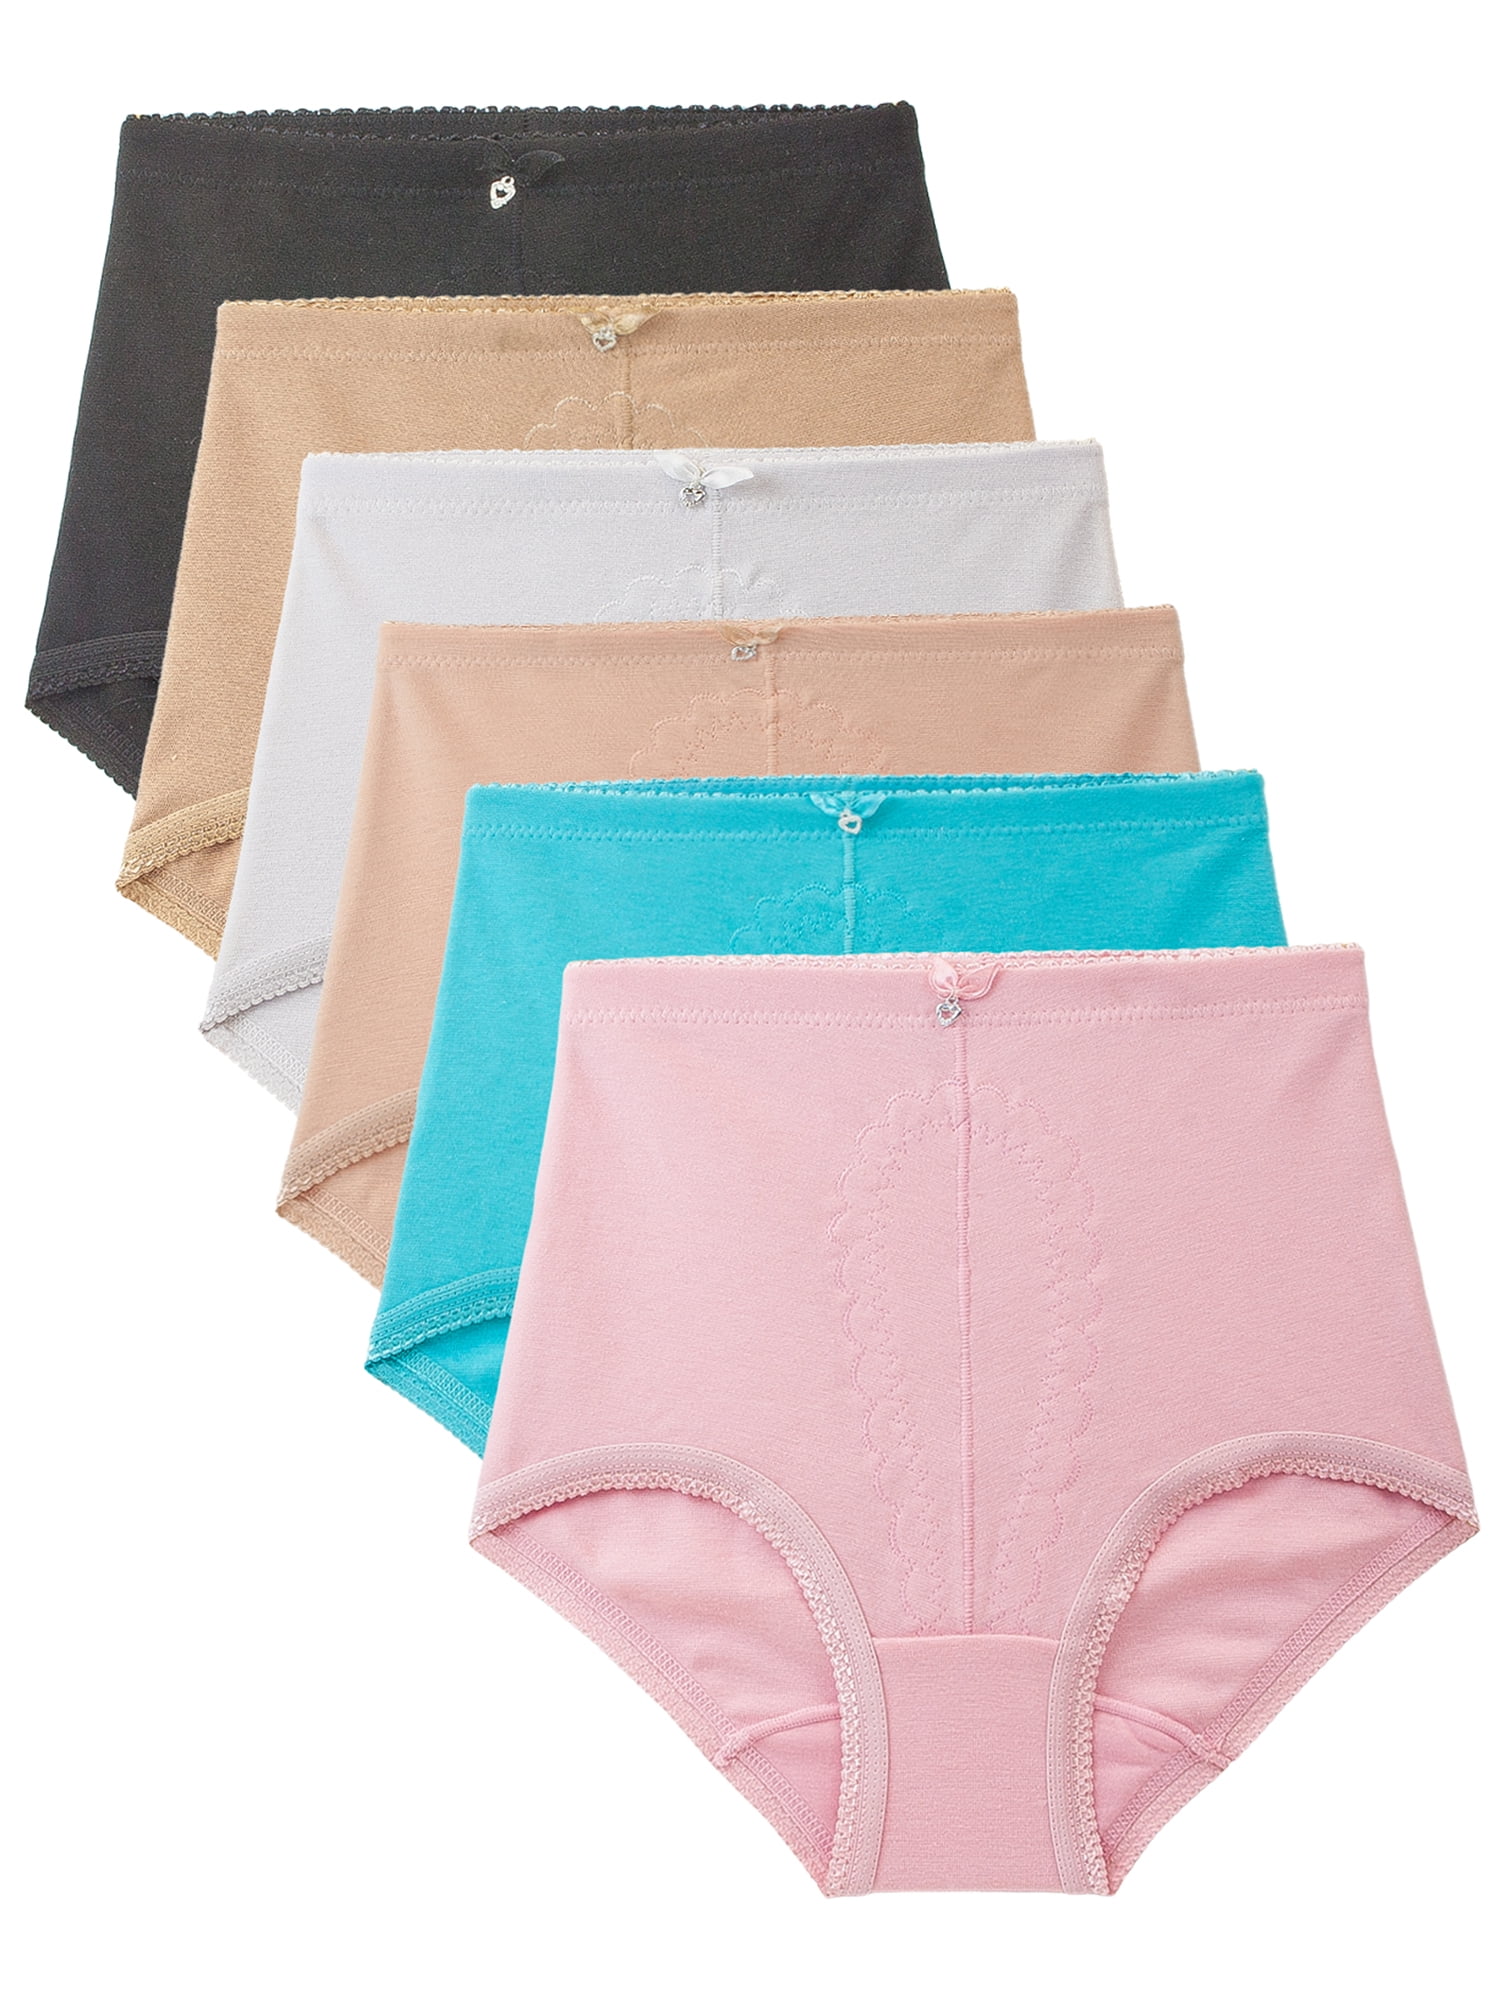 Barbra Lingerie Womens Underwear High-Waist Tummy Control Girdle Panties Small to Plus Size Assorted 6 Pack 